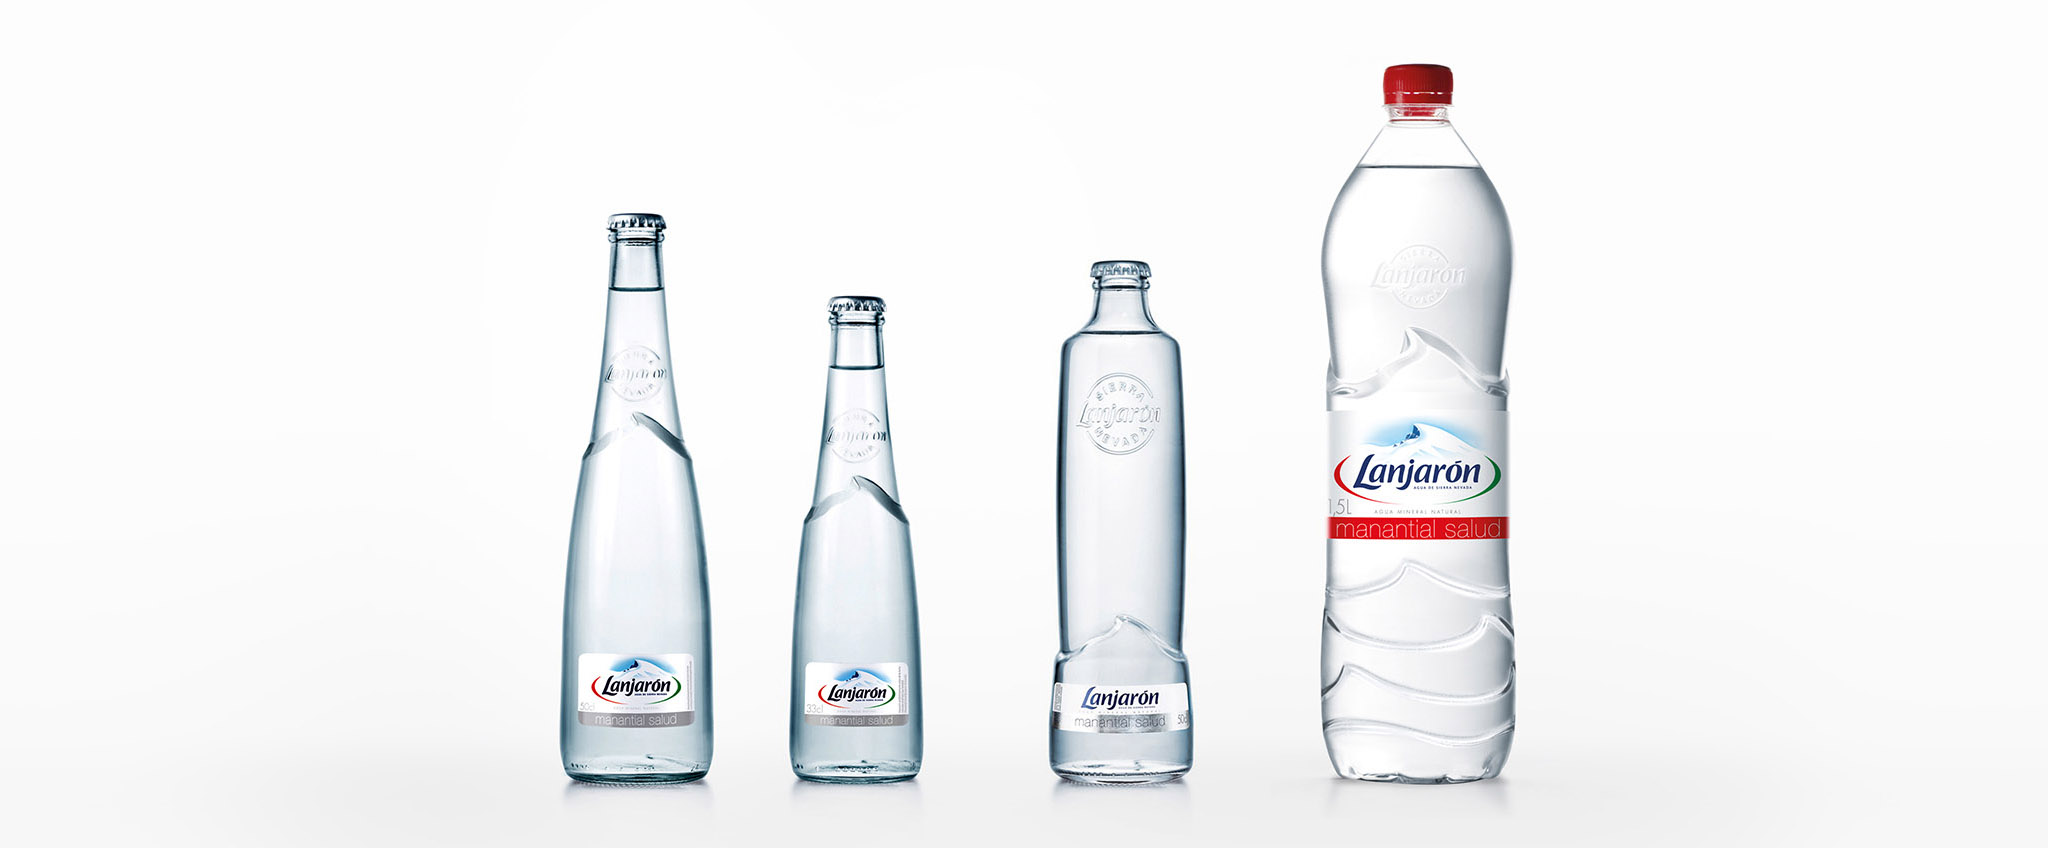 Product design for lanjaron mineral water bottles.